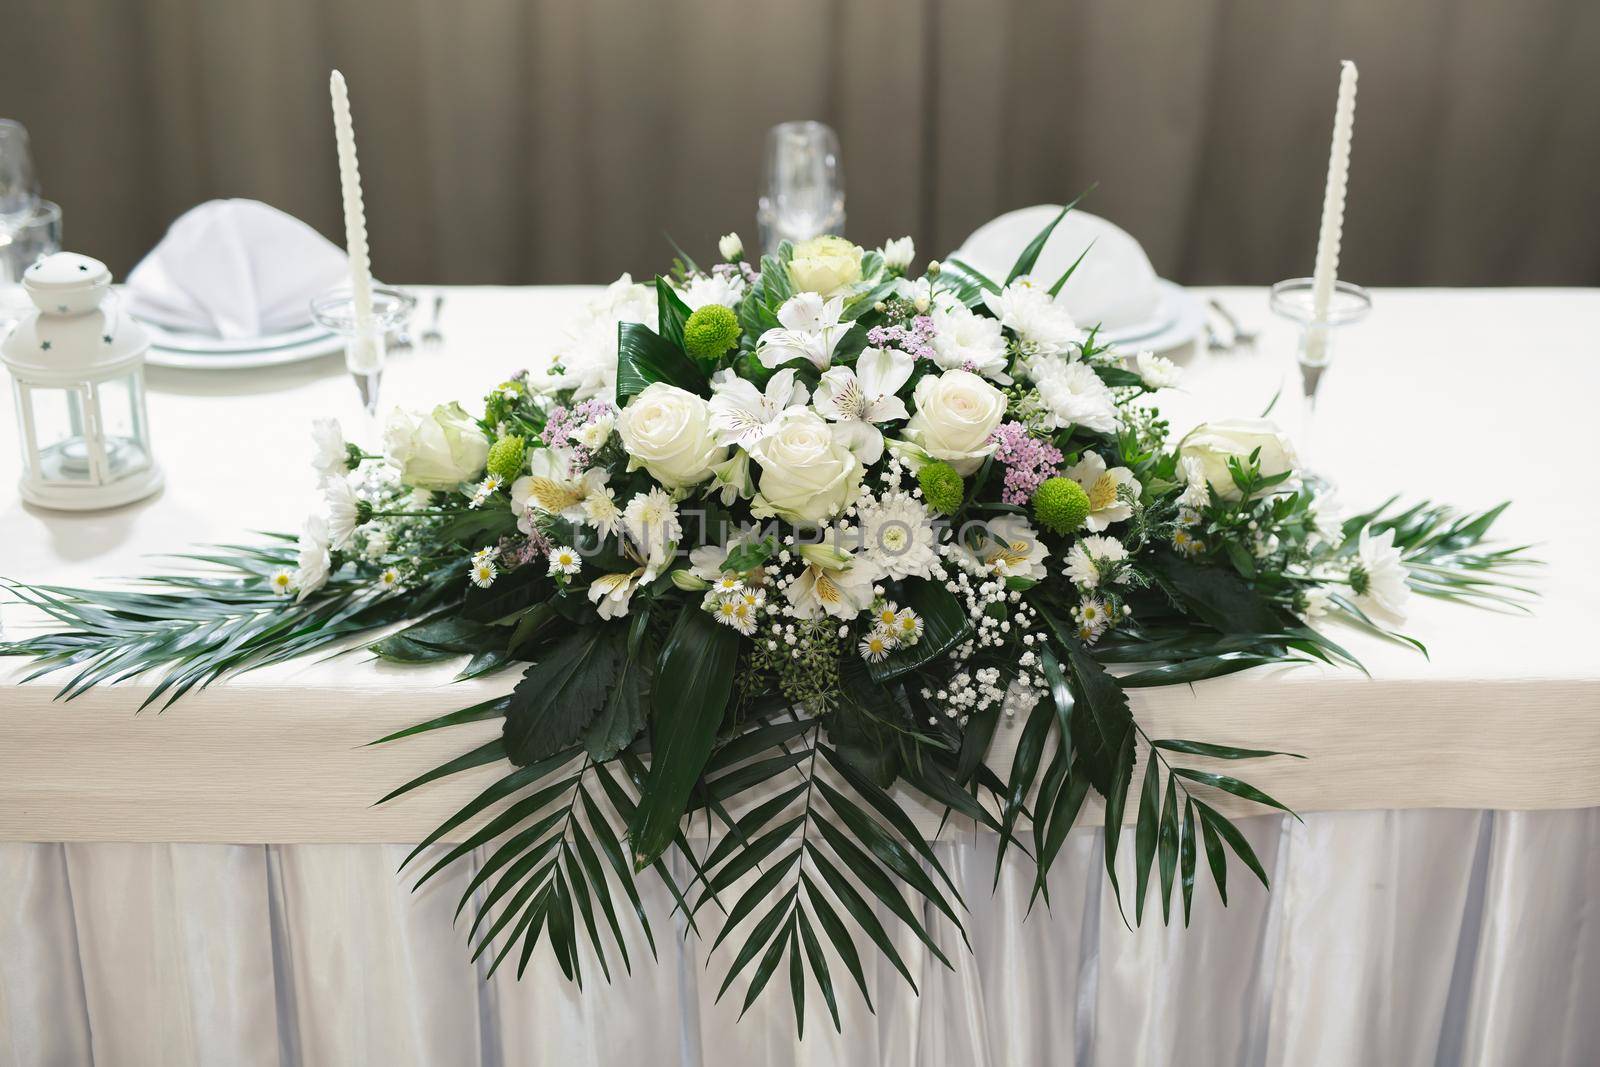 Wedding floral decor in white at a banquet in a restaurant by StudioPeace